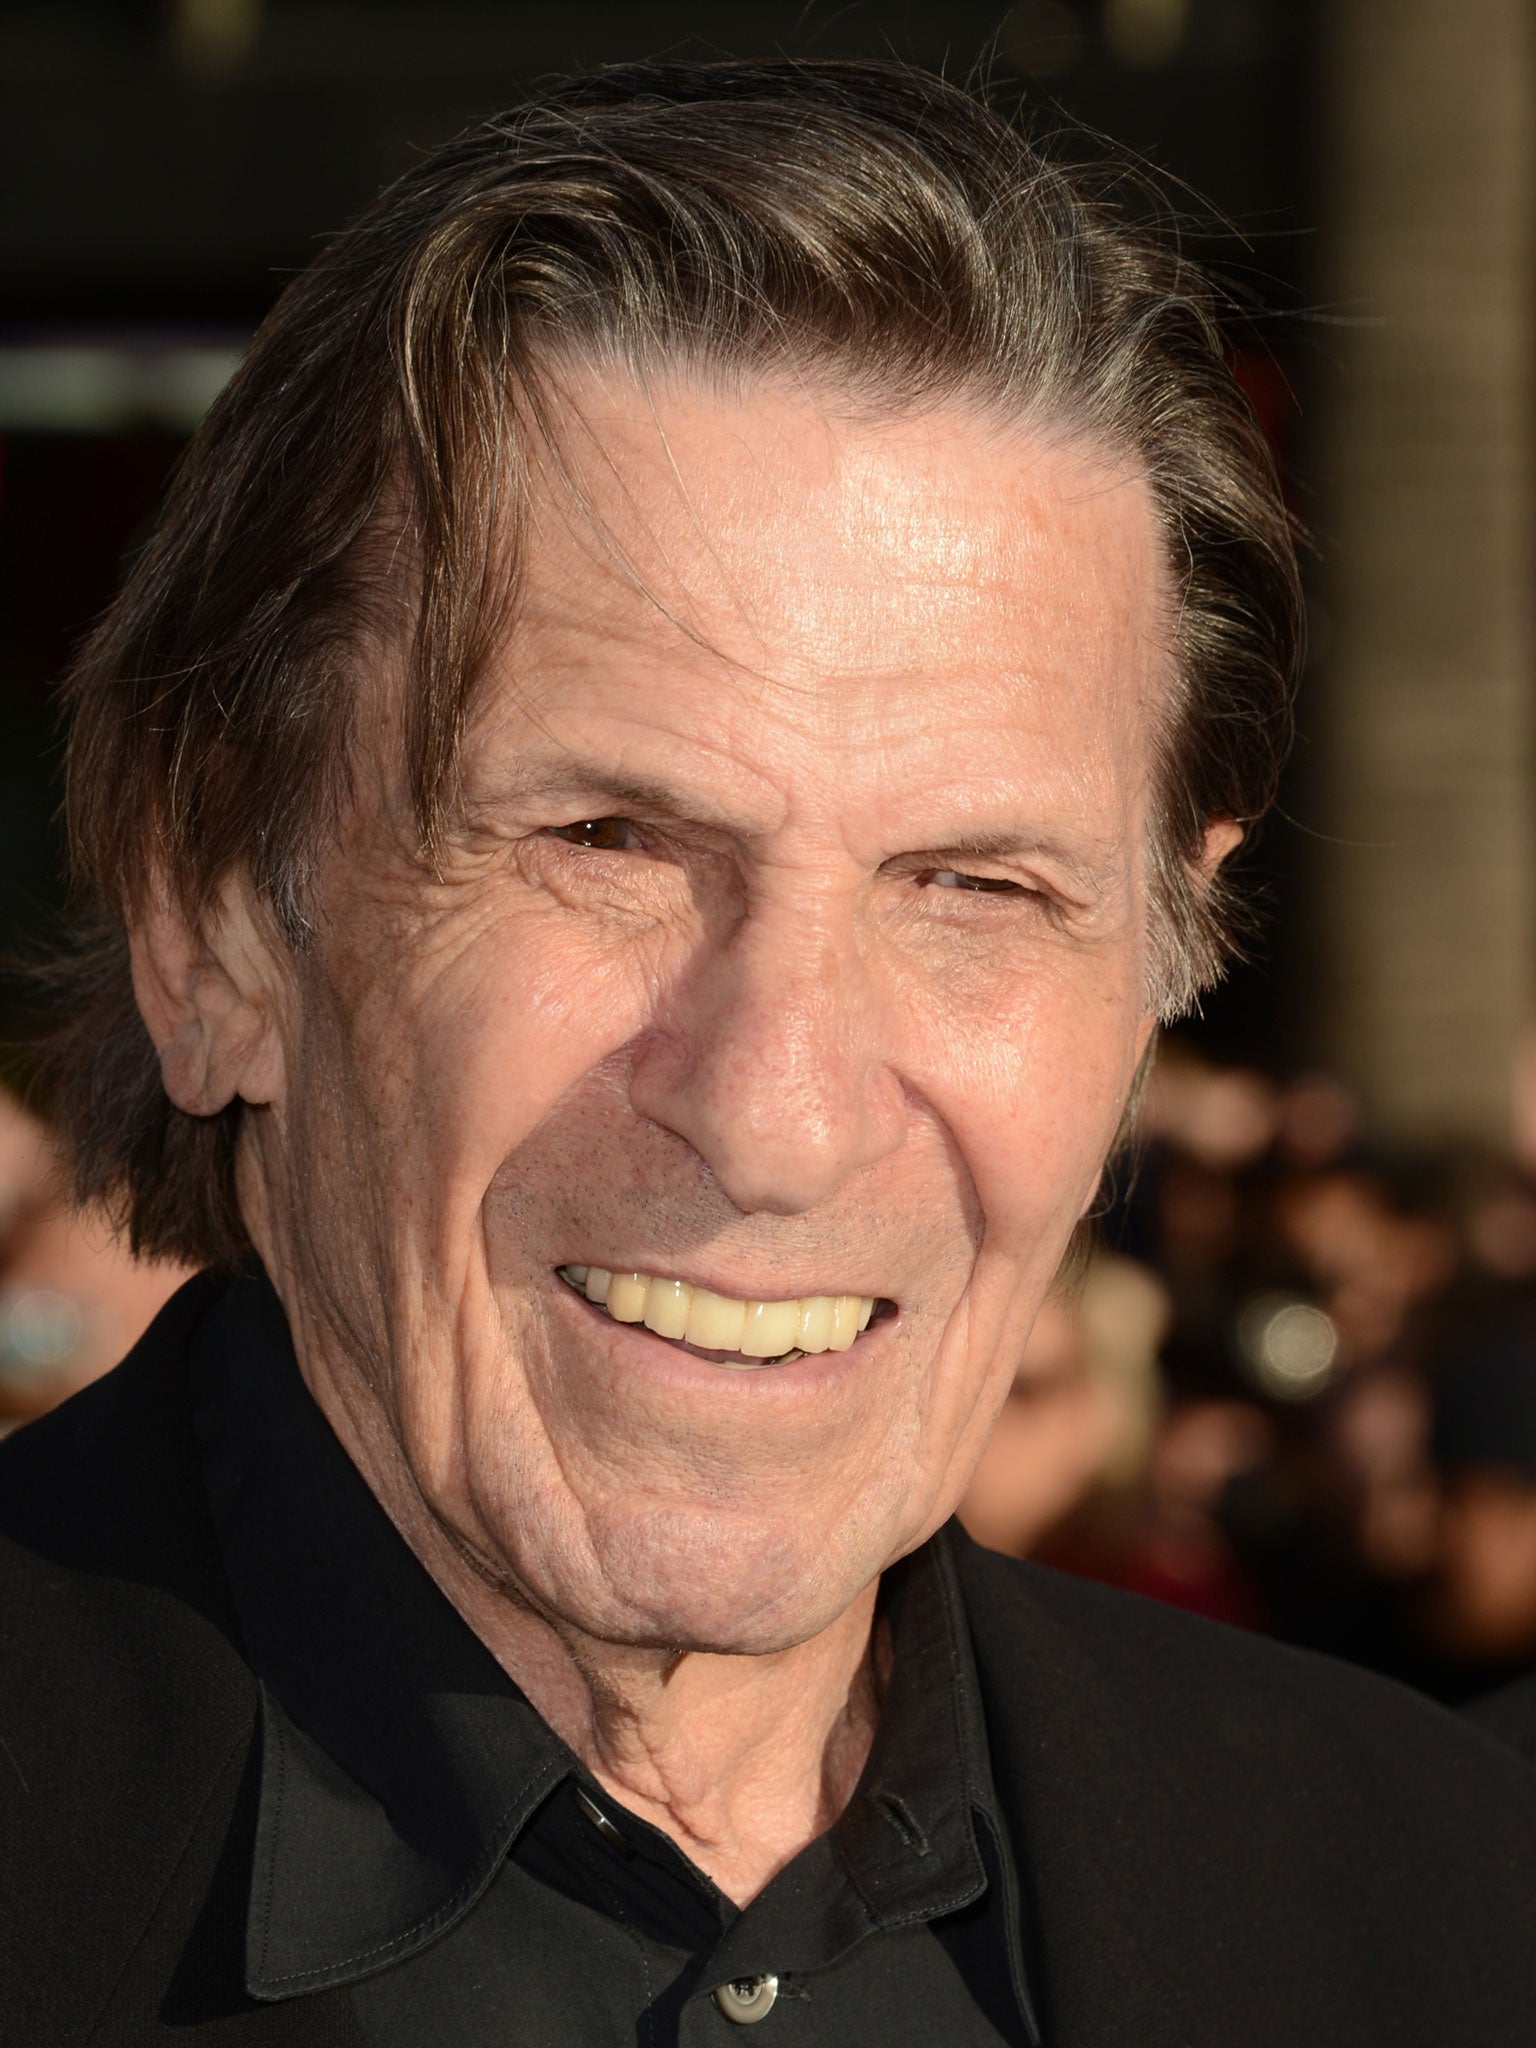 The Star Trek star Leonard Nimoy, who has revealed he is suffering from chronic lung disease